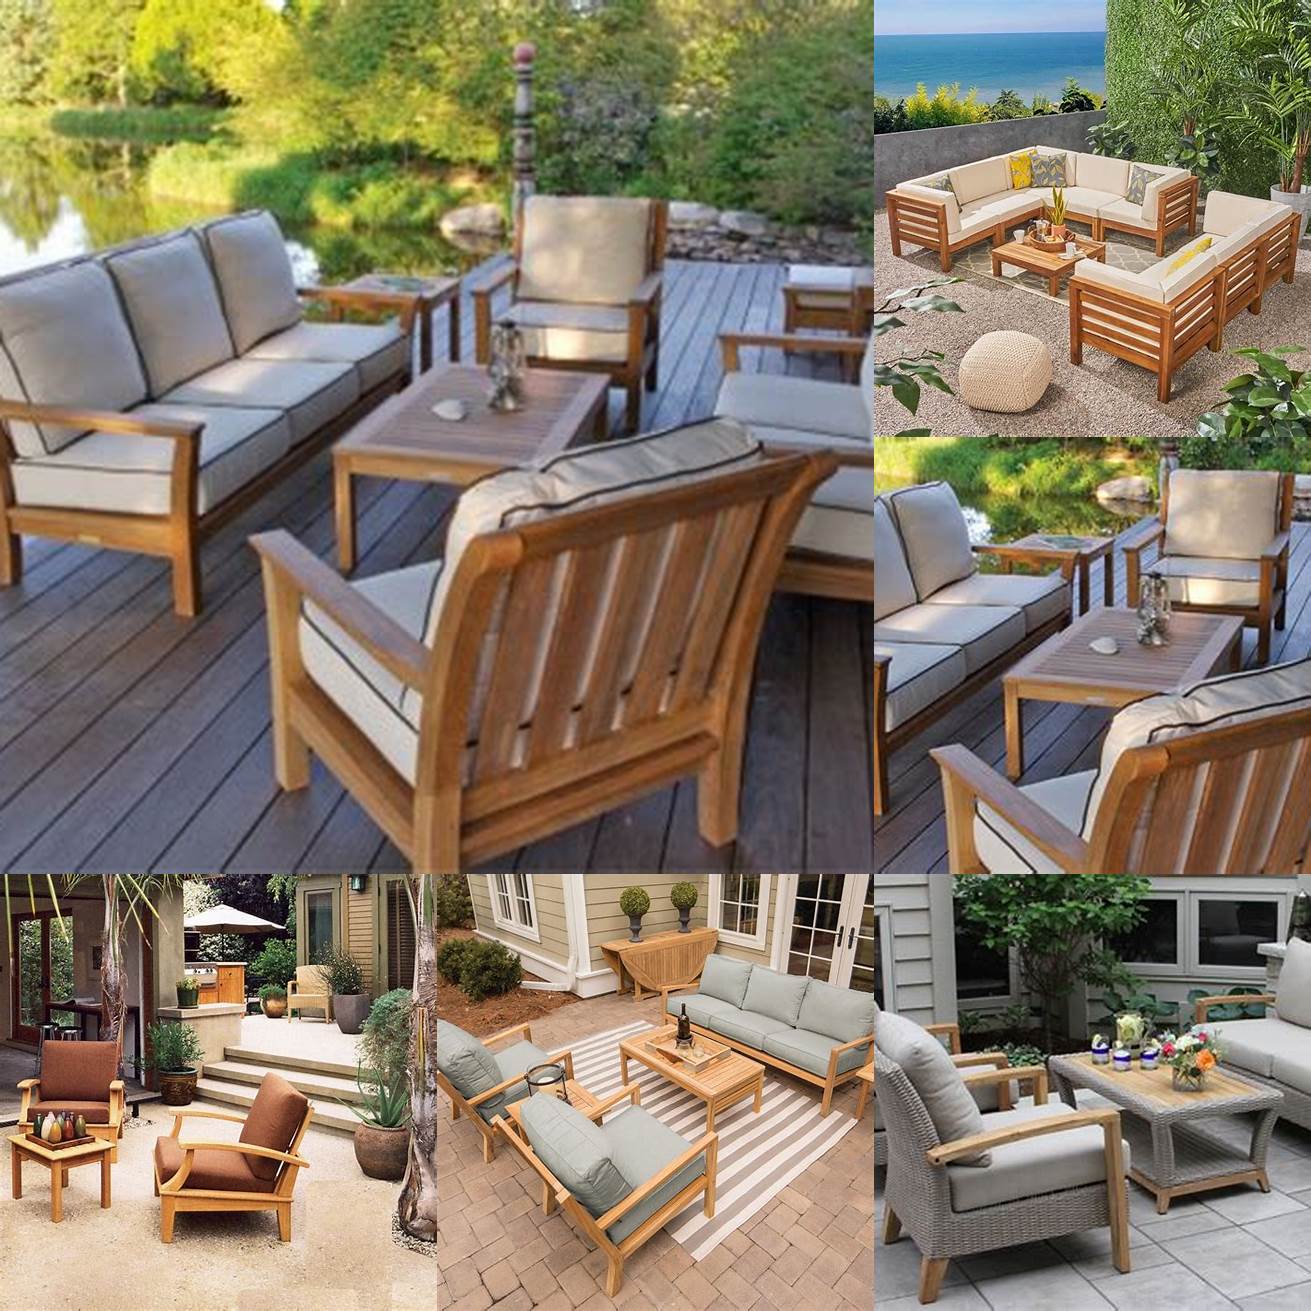 A picture of teak deck furniture in a outdoor living space